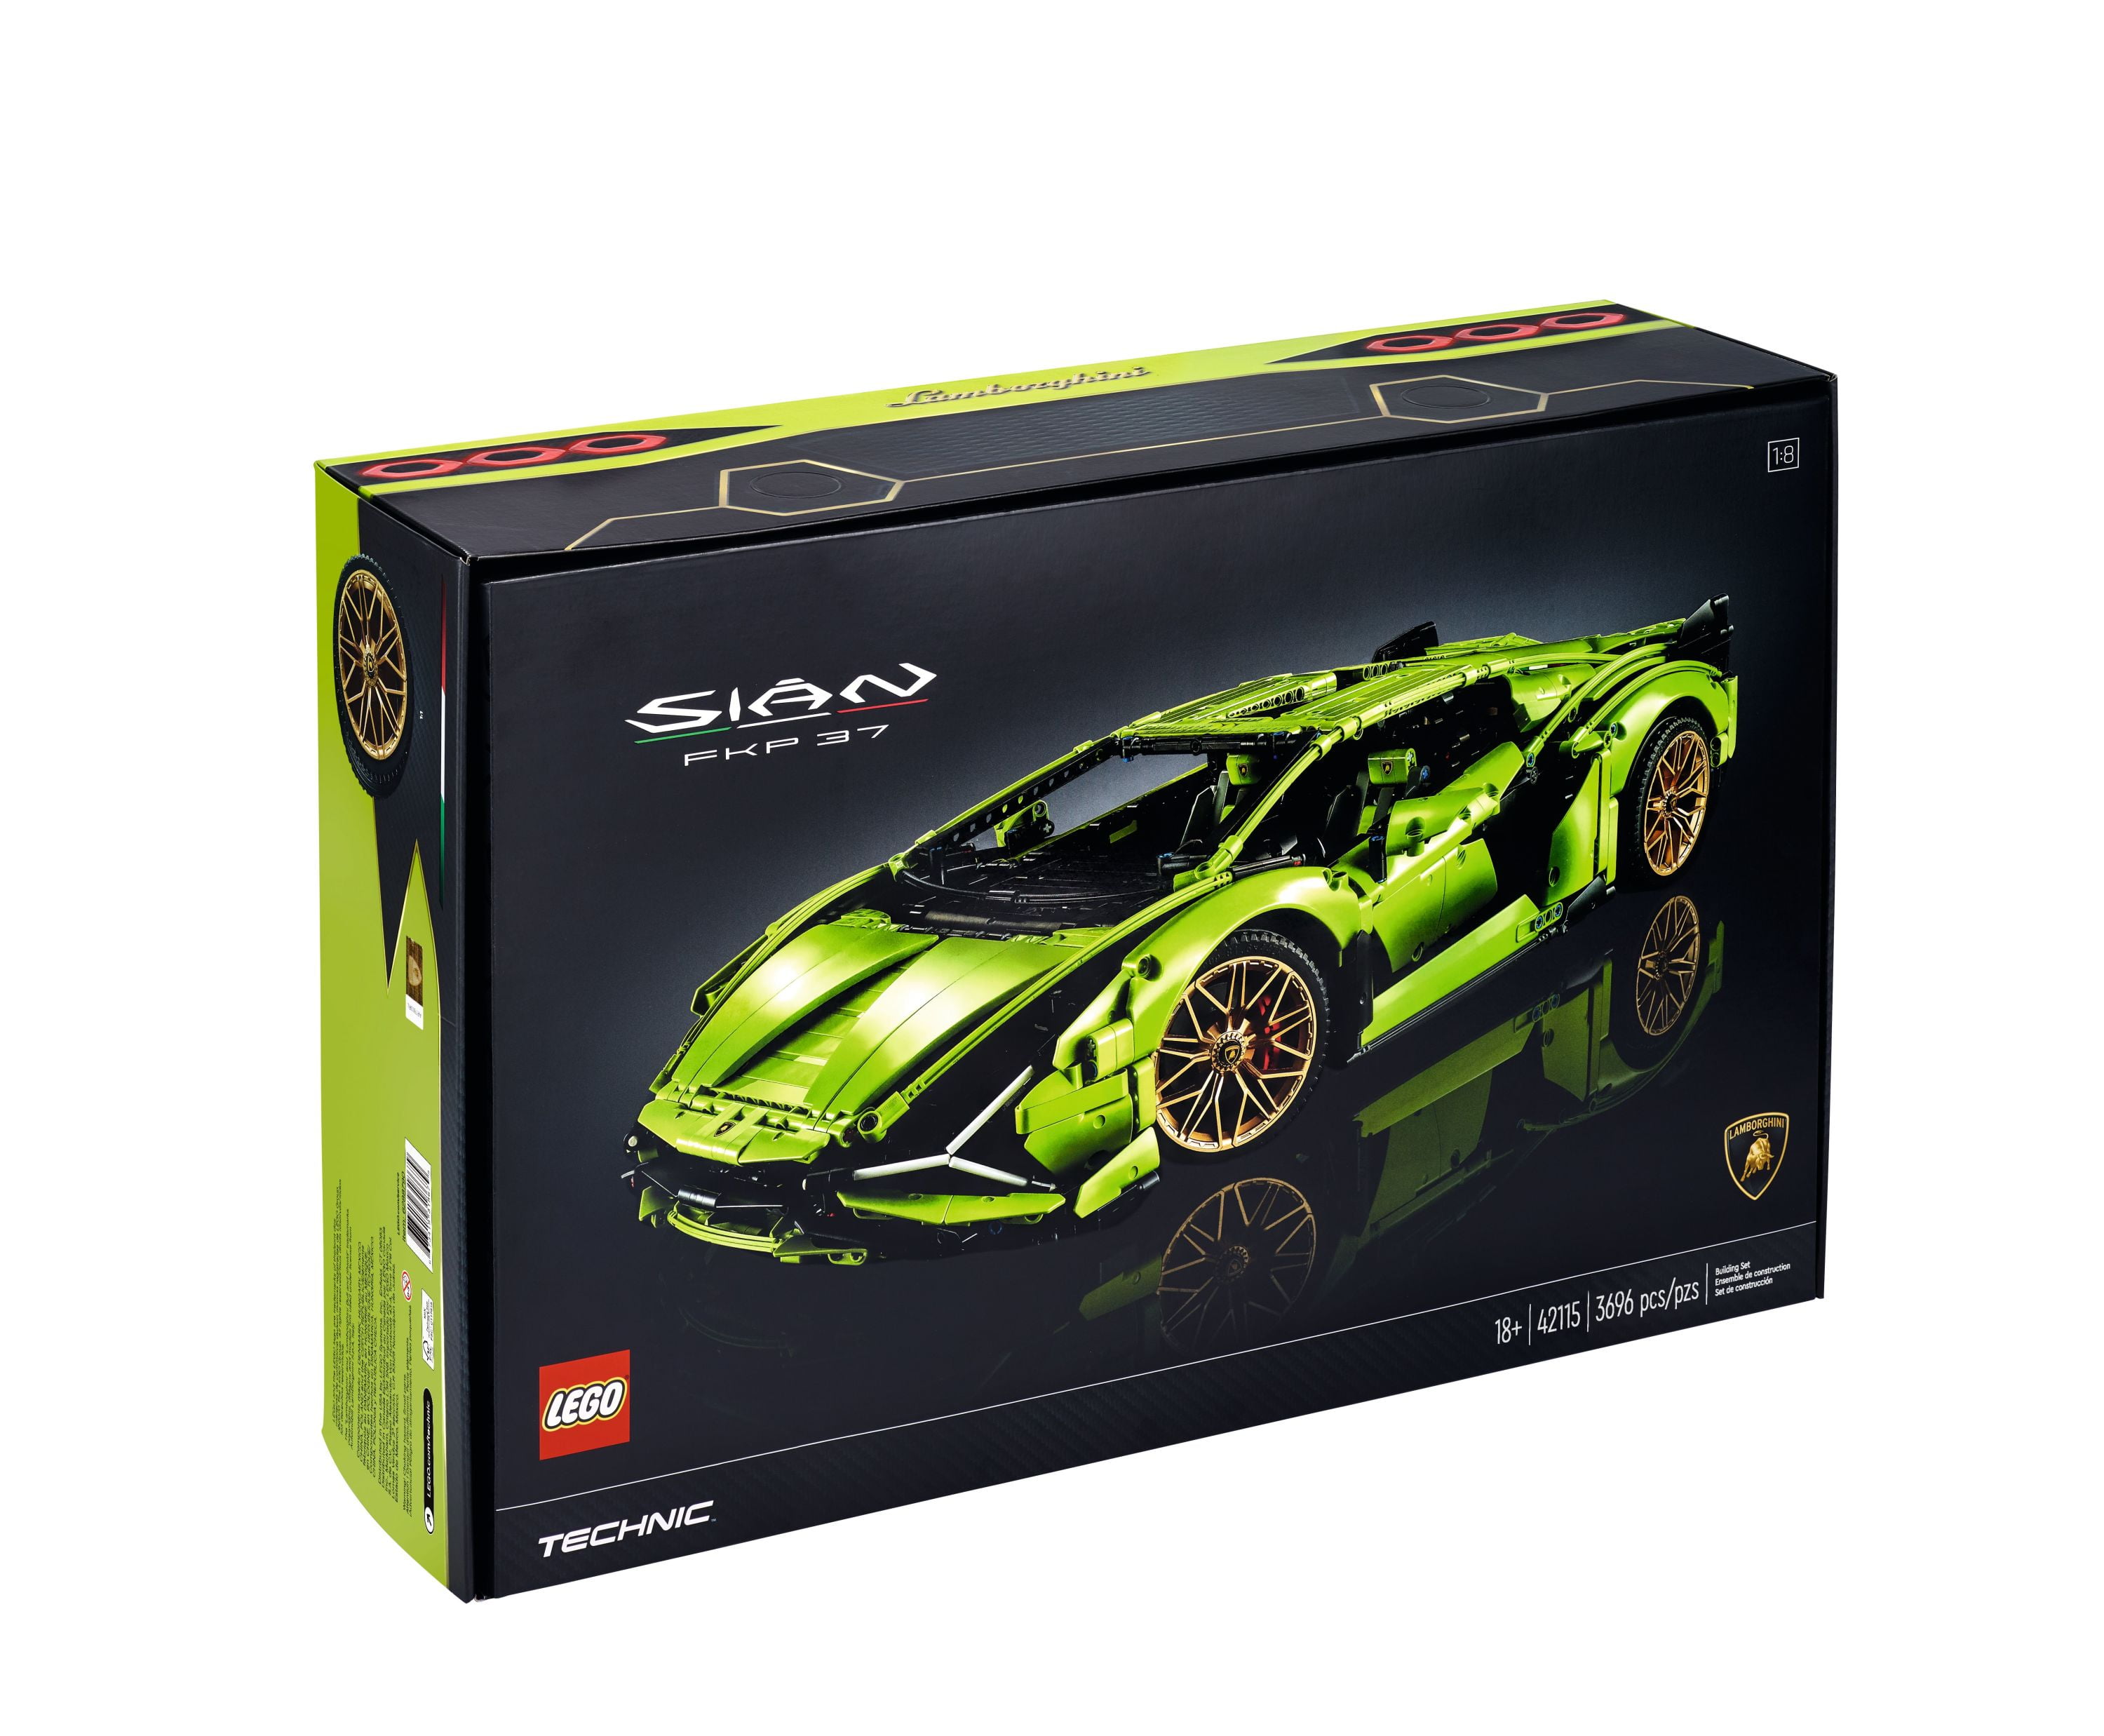 Ekstrem frost Memo LEGO Technic Lamborghini Sián FKP 37 42115 Building Set - Classic Super Car  Model Kit, Exotic Eye-Catching Display, Home or Office Décor, Ideal for  Adults or Car Enthusiasts - Walmart.com